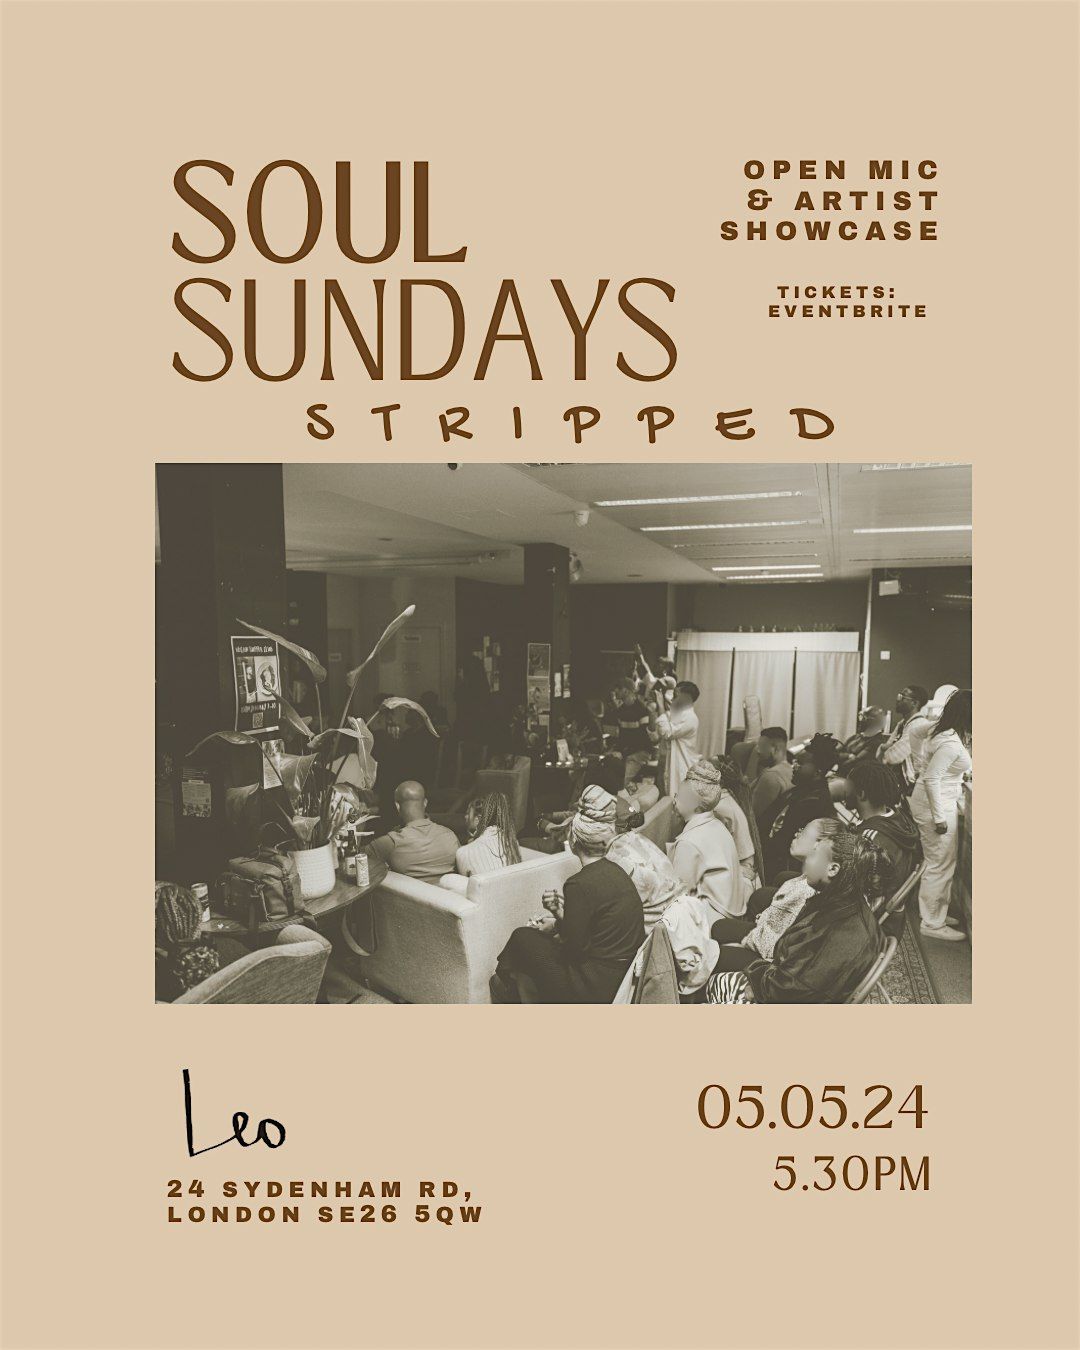 Soul Sundays Stripped - an acoustic show